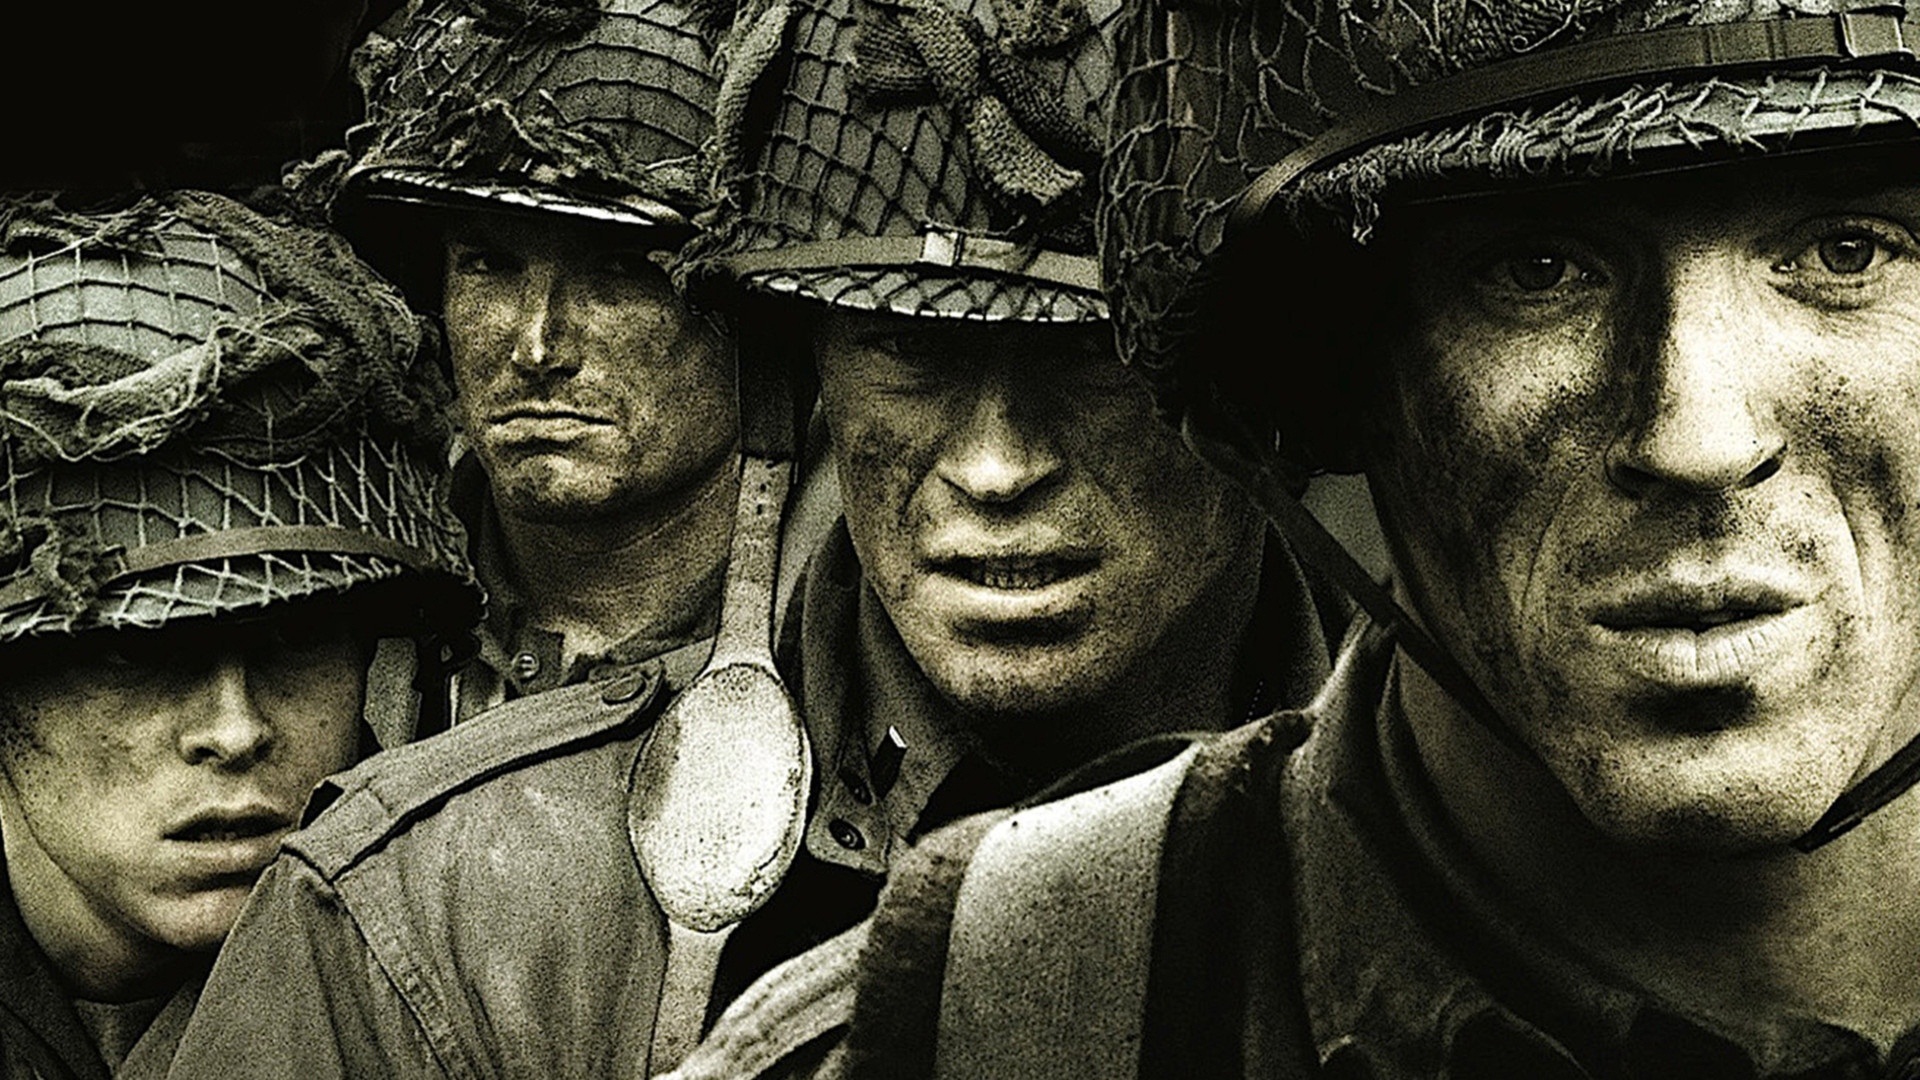 Band Of Brothers Image Wallpaper Photos